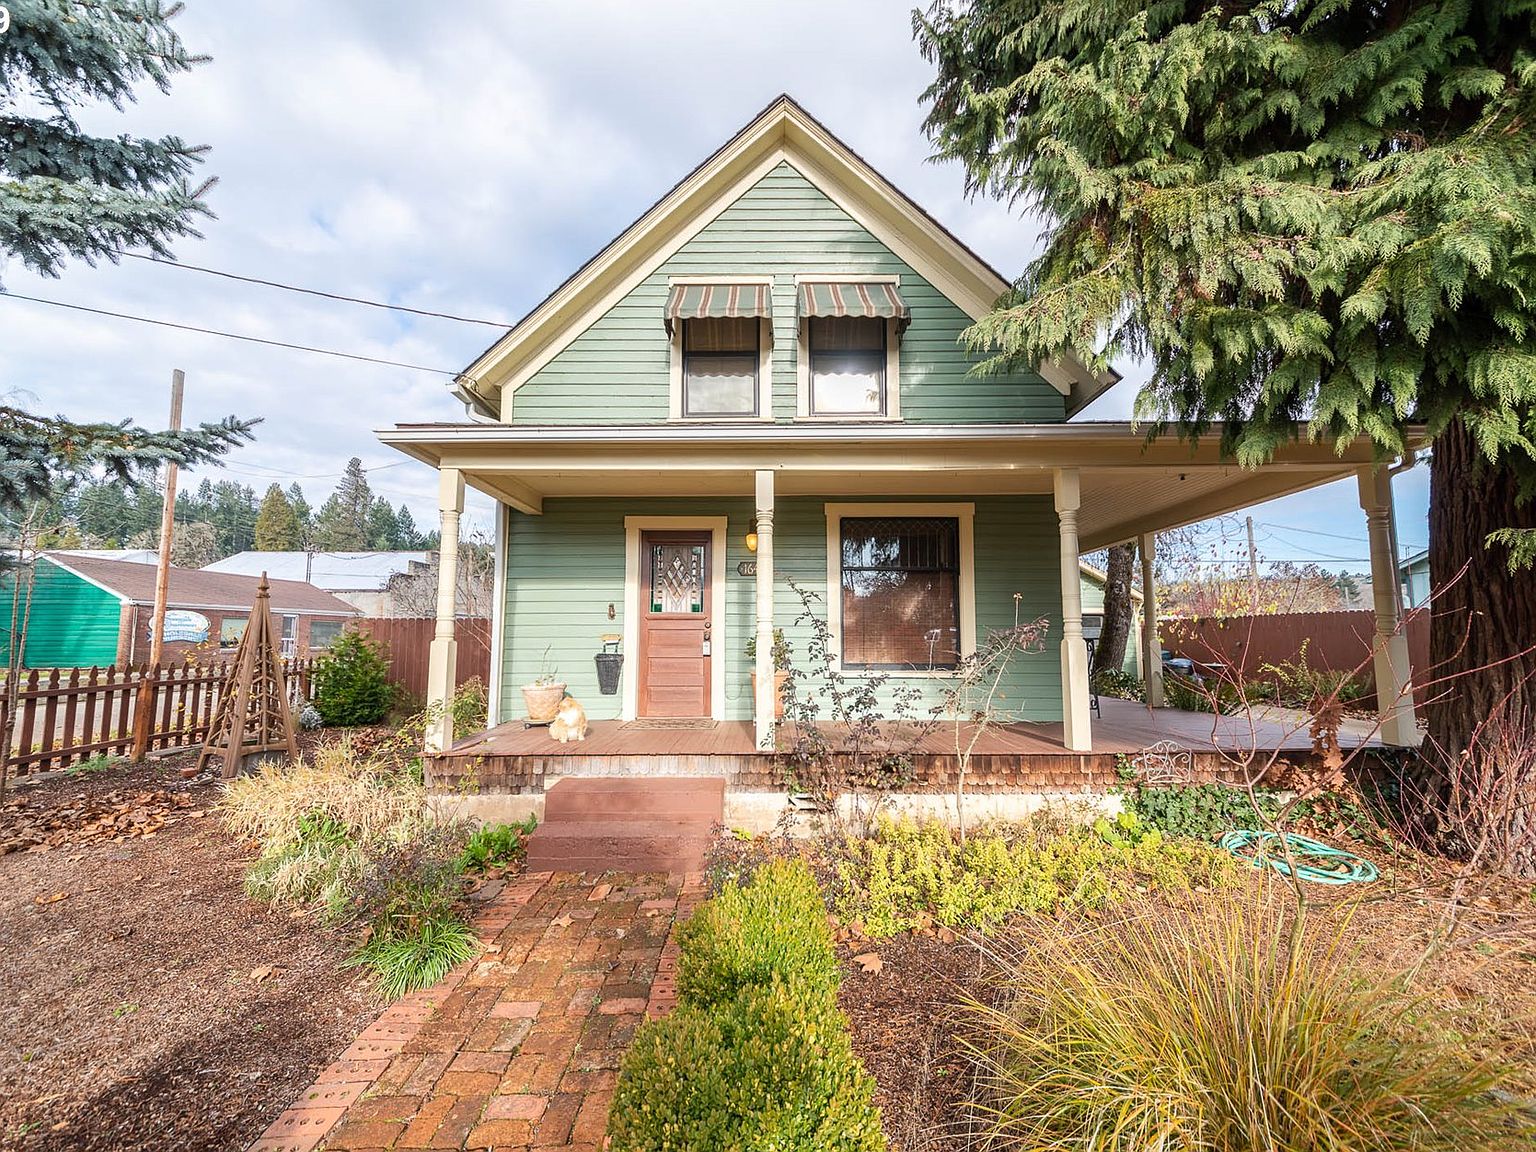 1642 W Main St Cottage Grove Or 97424 Zillow